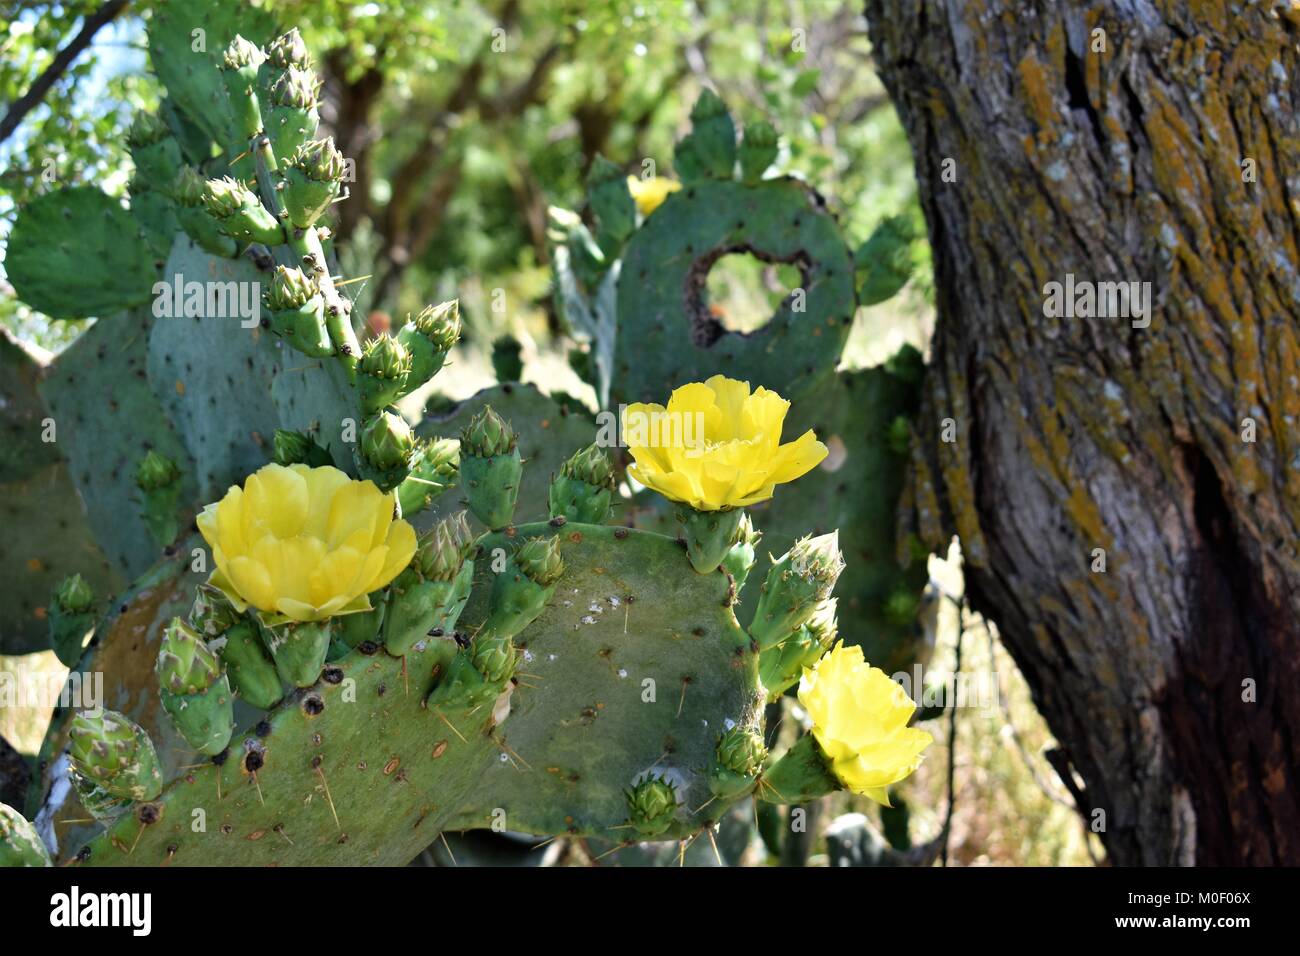 Prickly Pear with flowers Stock Photo